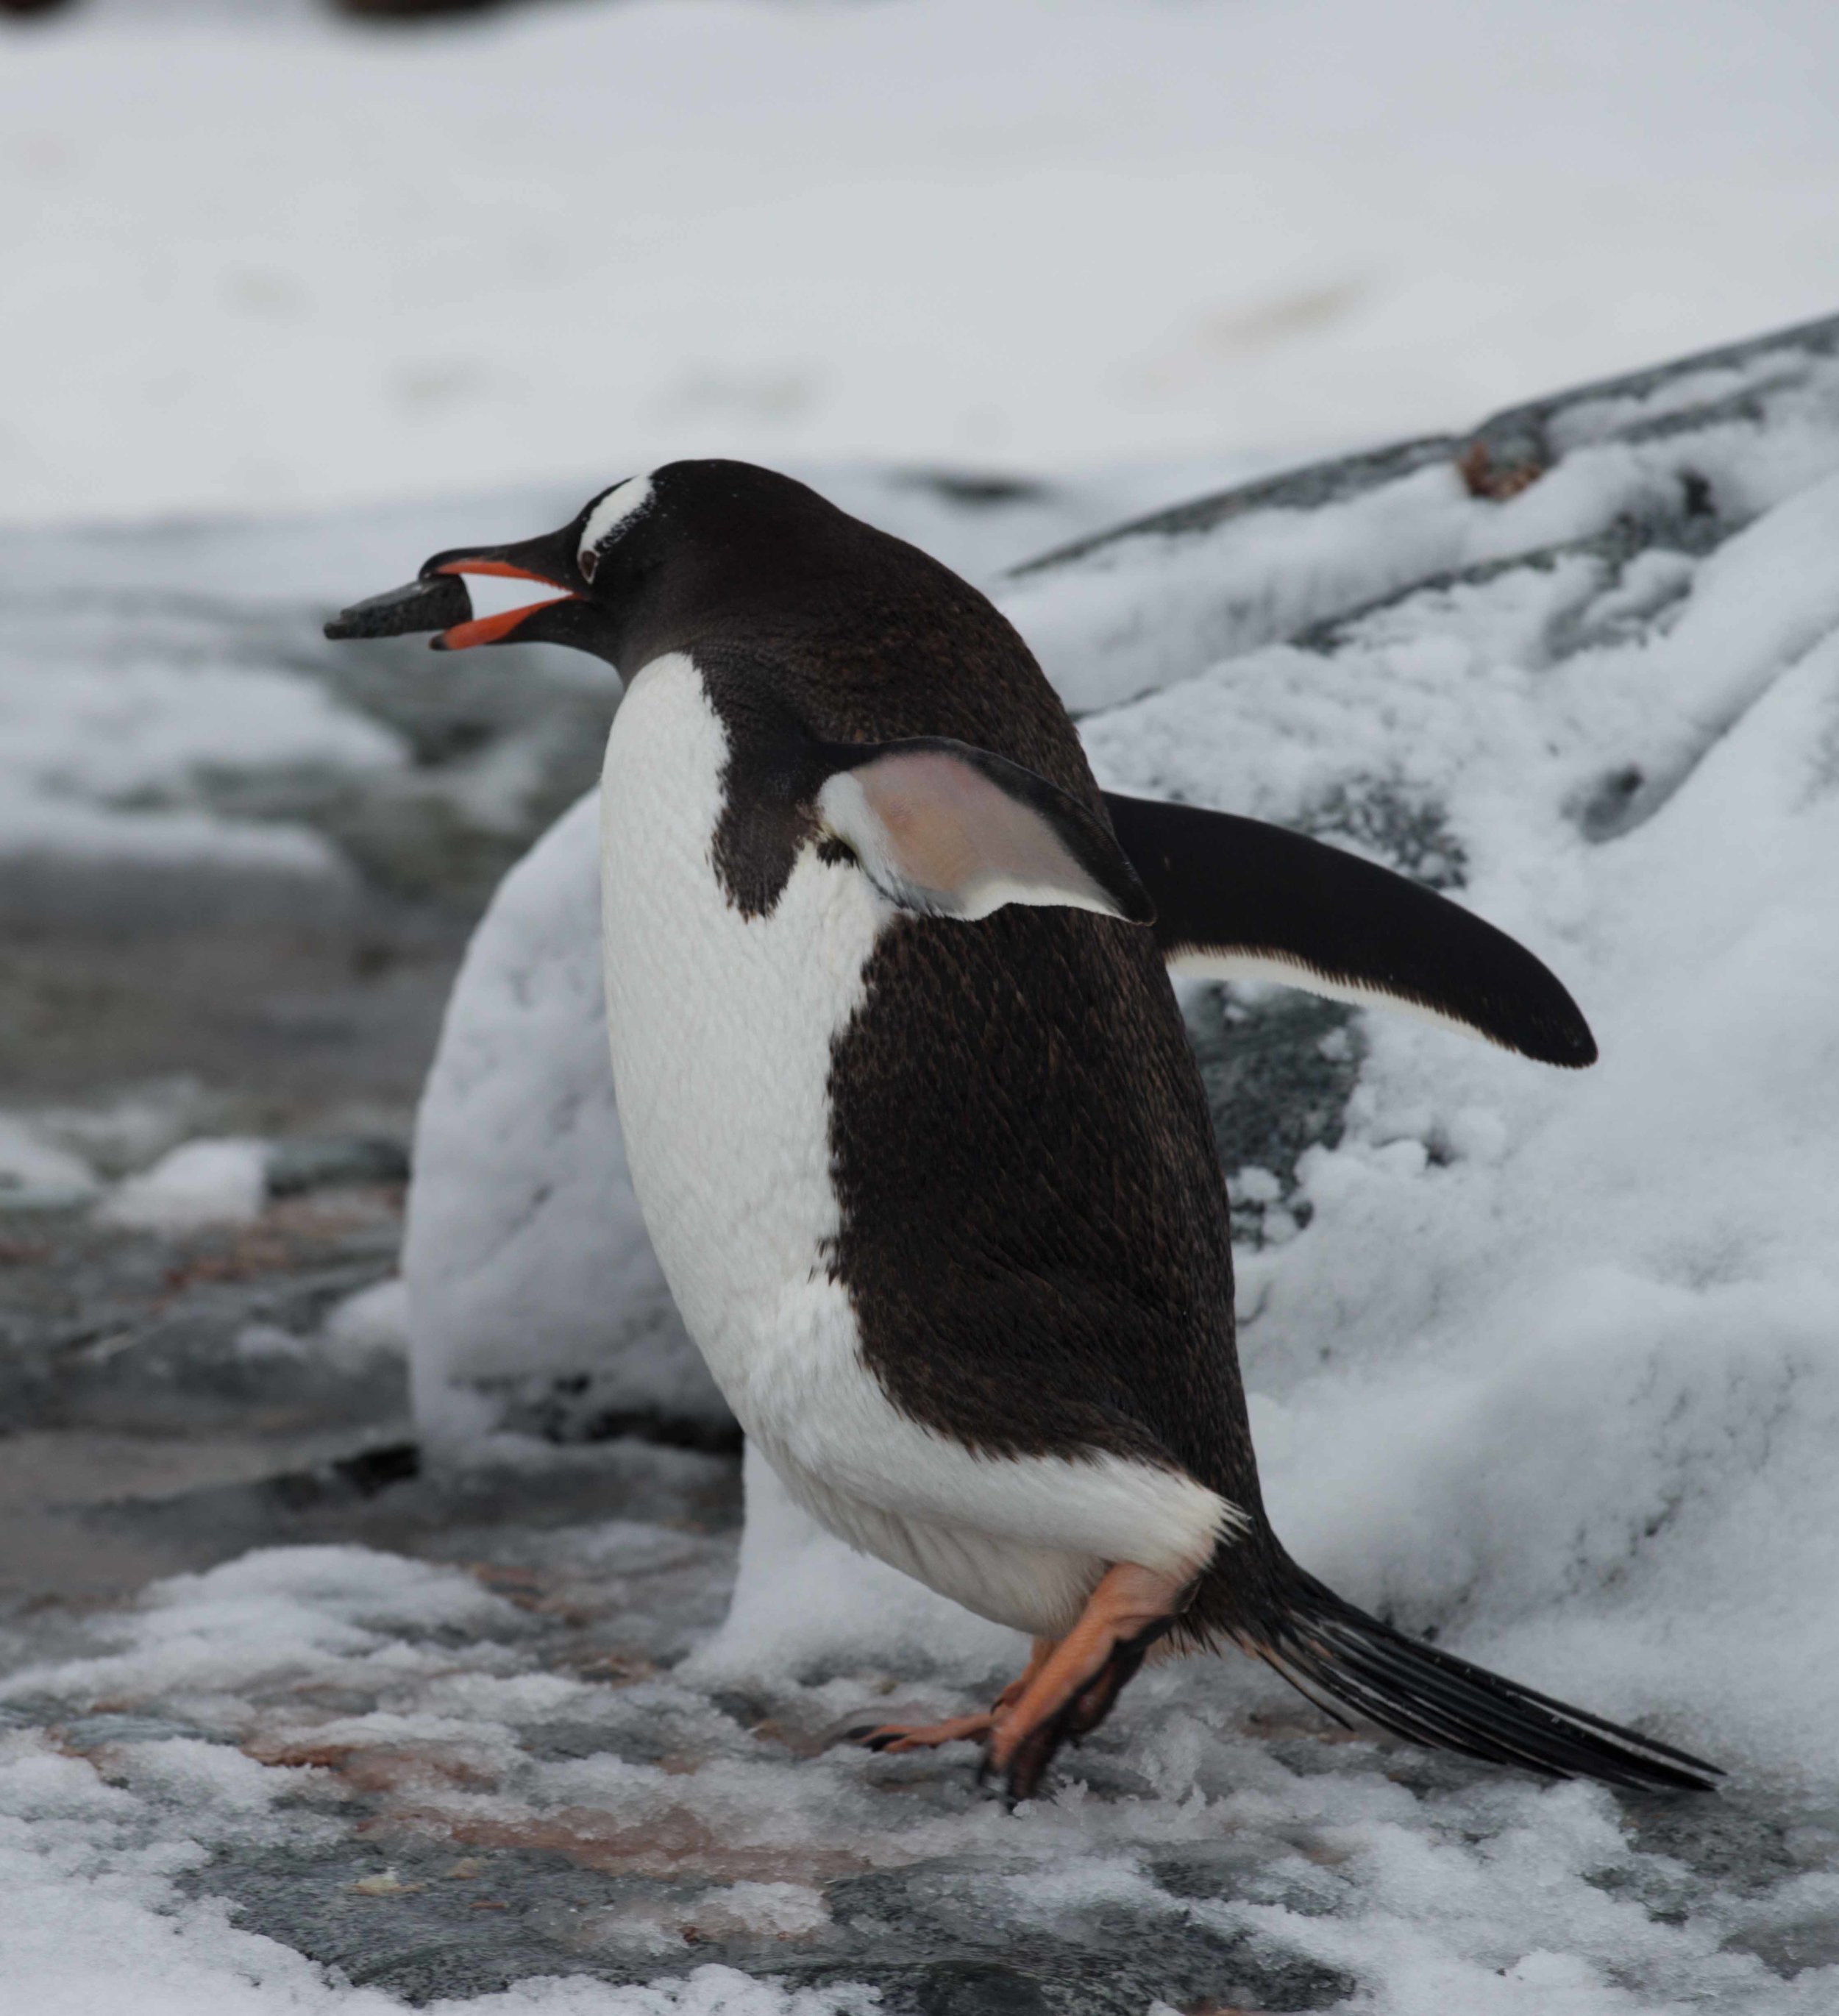 Gentoo penguin carries stones to his nest. Penguins breed in large colonies and form monogamous pairs for a breeding season, sharing incubation duties. 